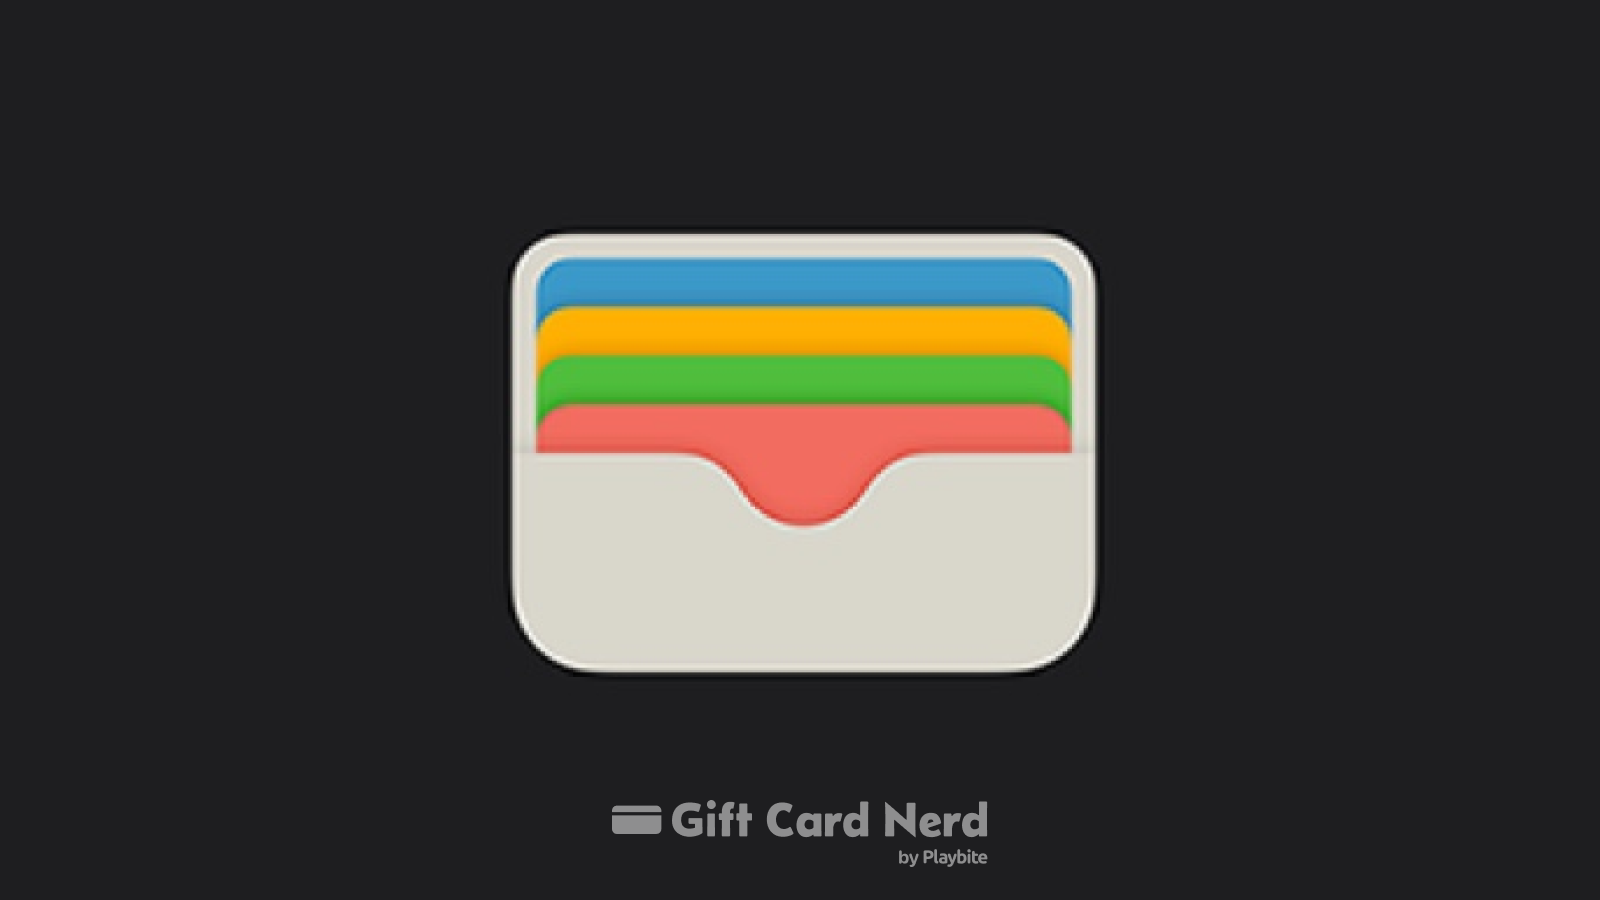 Can I Use an Apple Gift Card on Google Play Store?